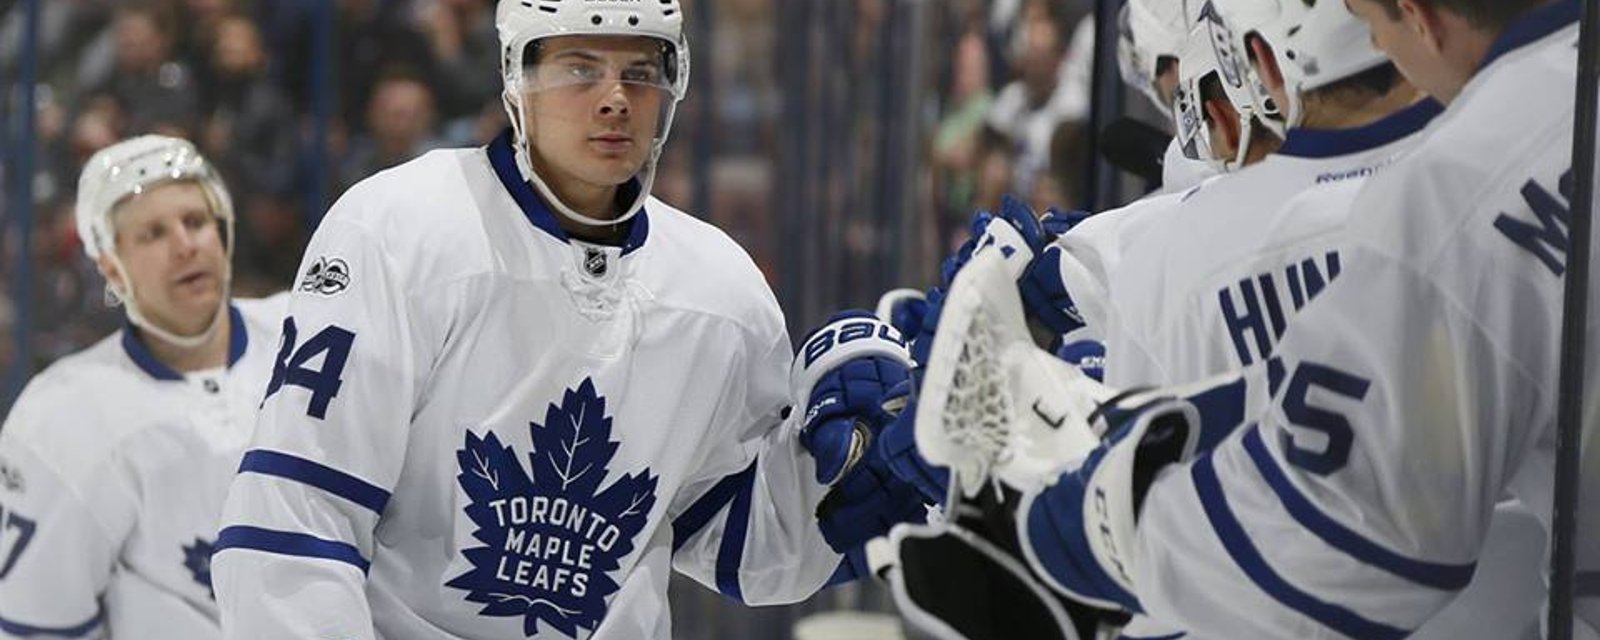 Breaking: Leafs approach 100-year franchise record